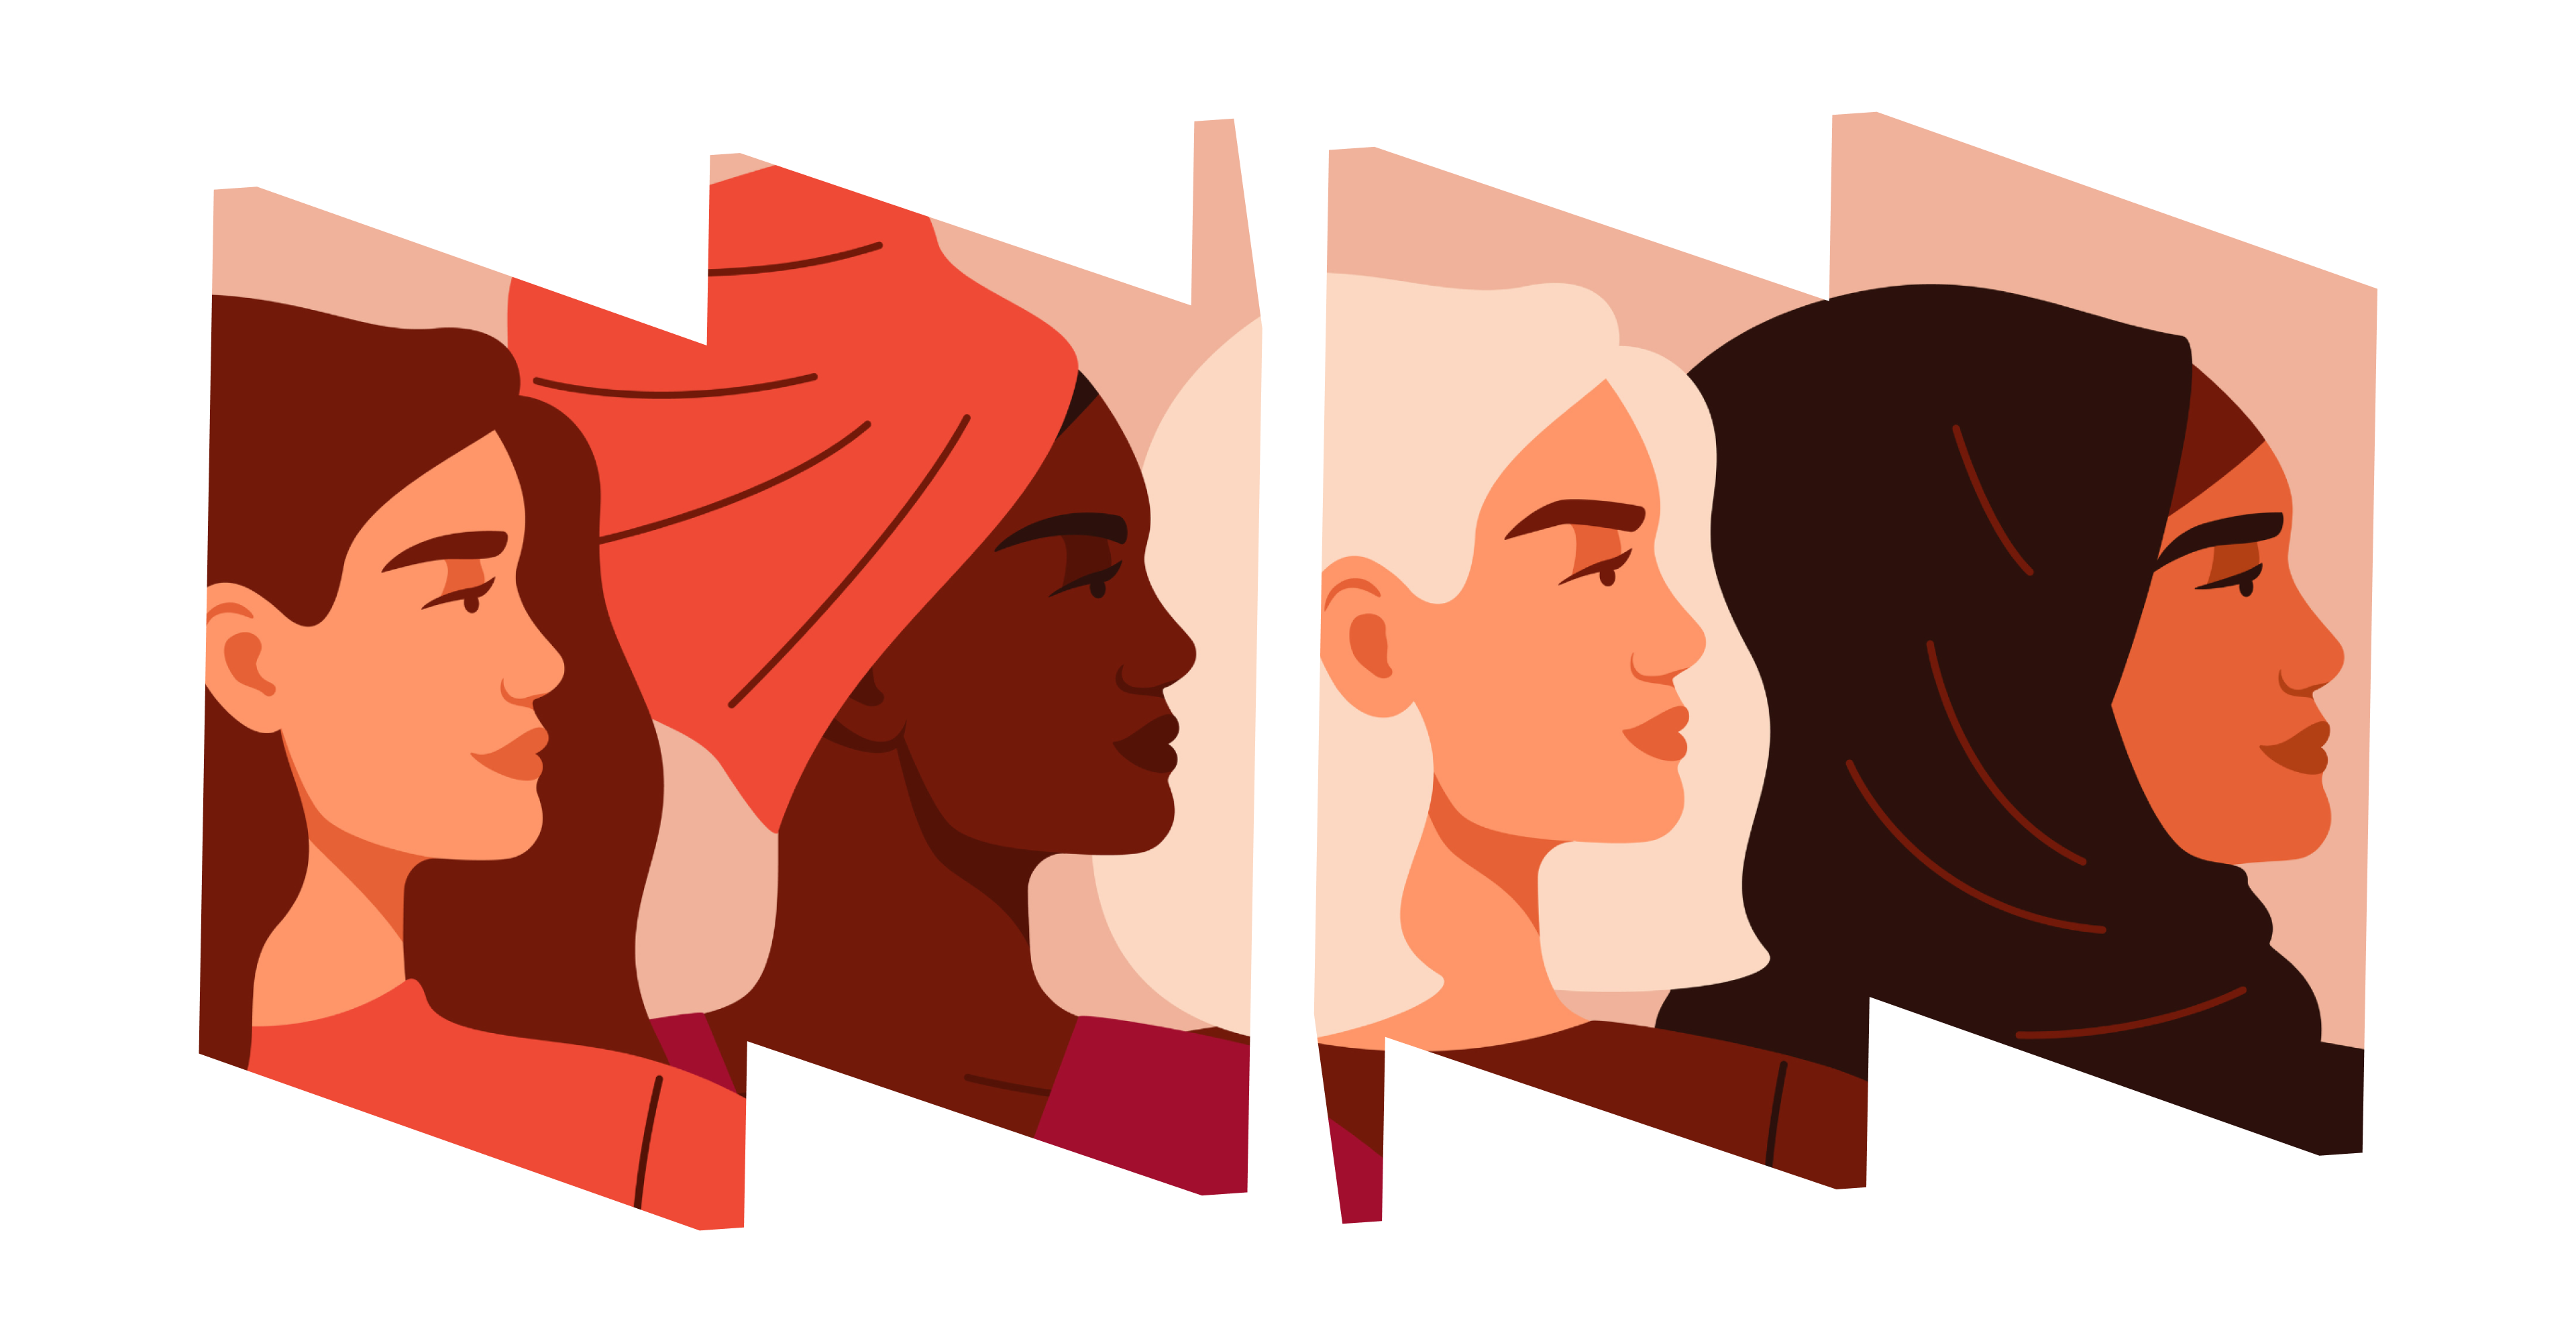 Illustrated portraits of four women of different nationalities and cultures standing together in W and M frames.